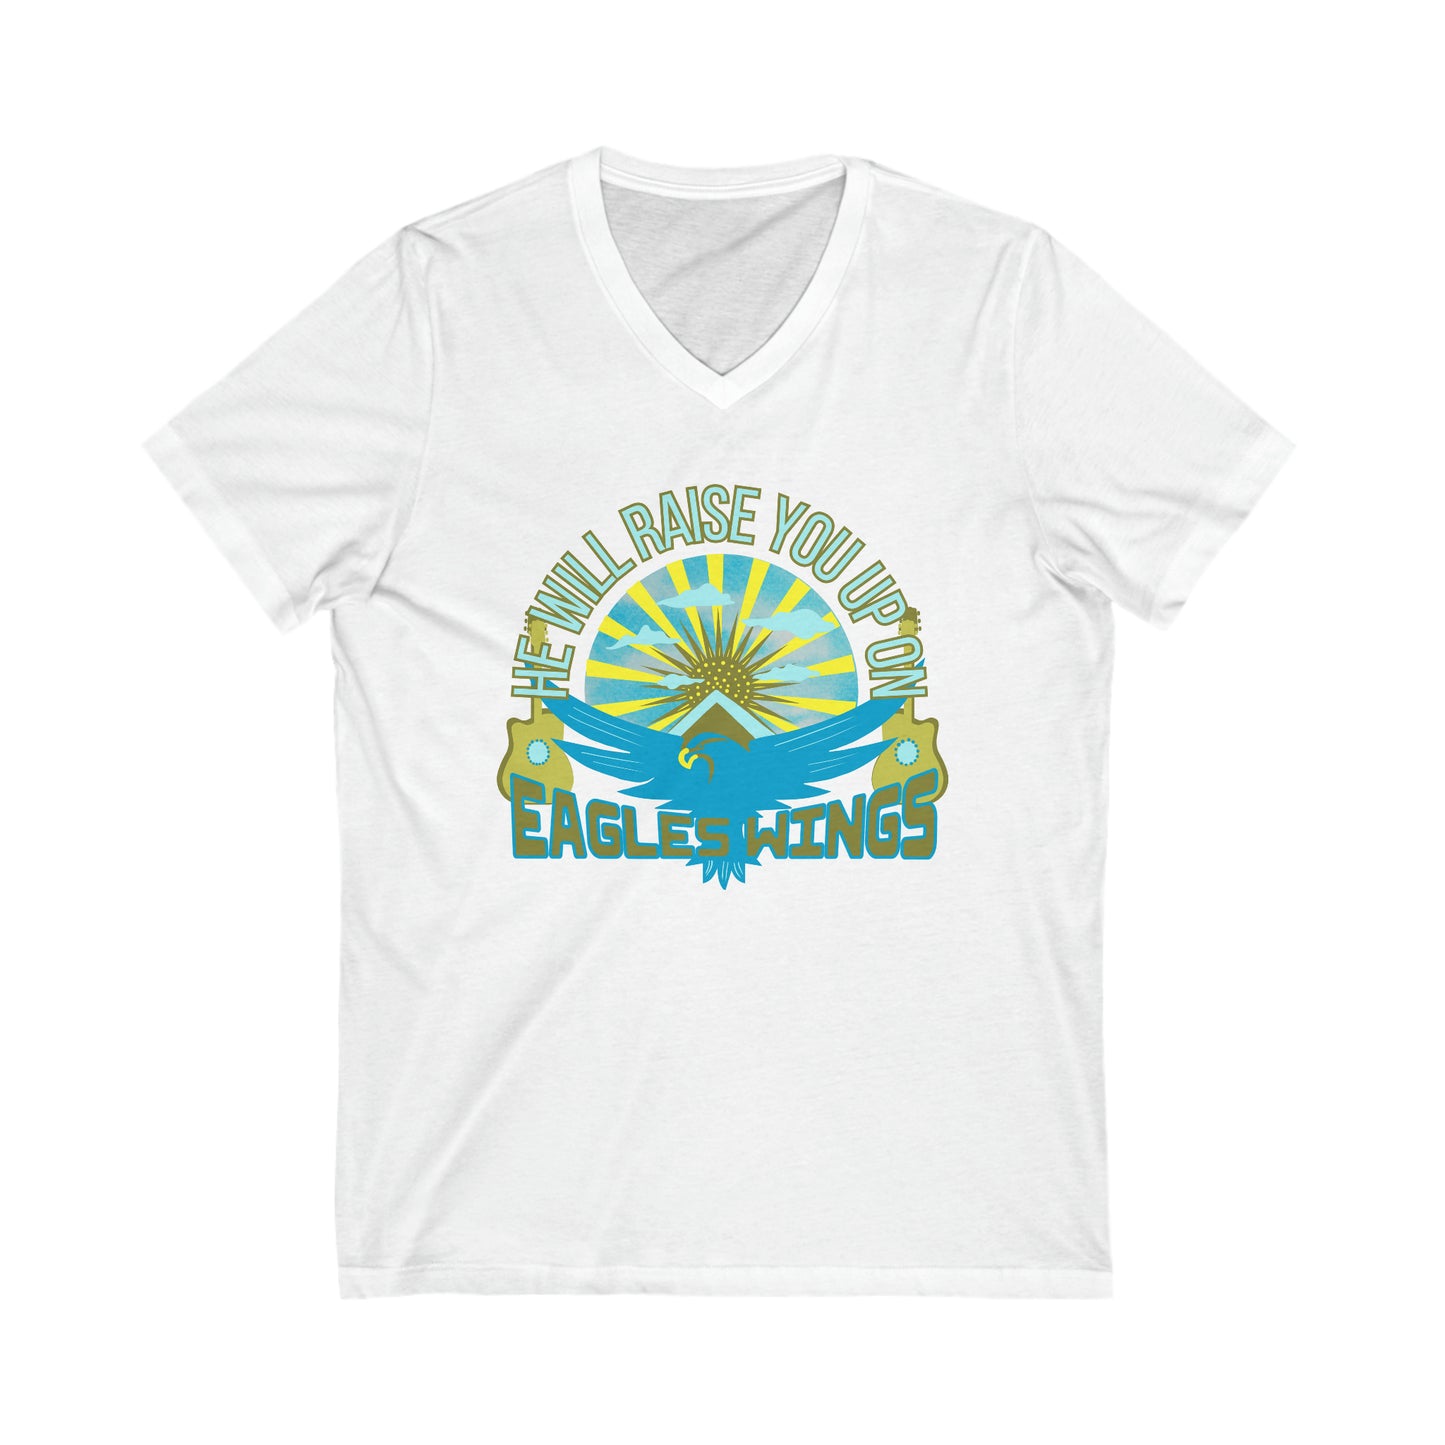 Raise You Up On Eagles Wings (Tall Size) (Green Pastures Apparel)